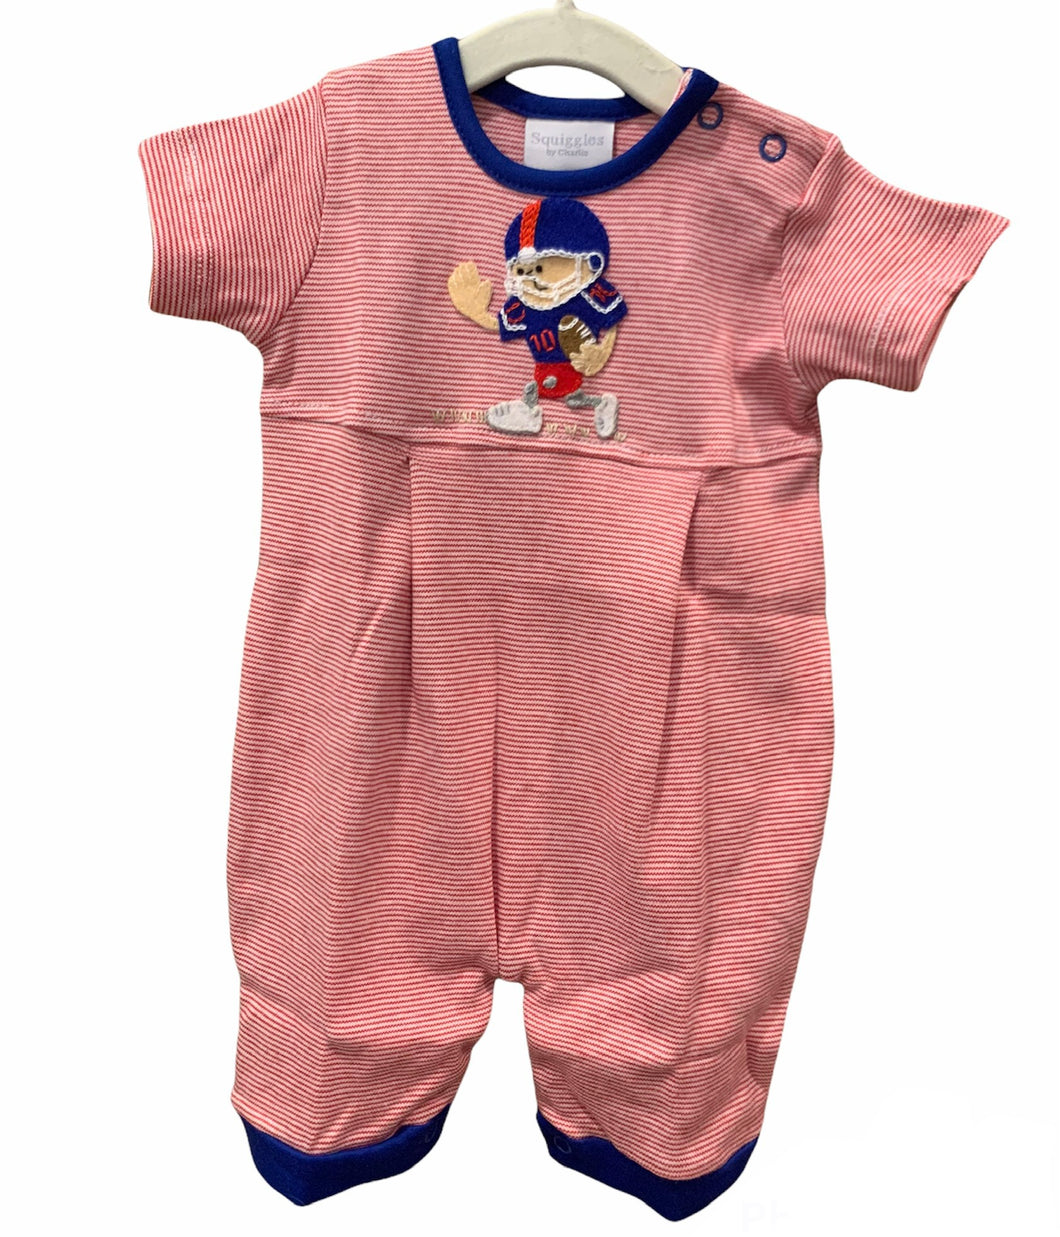 Red + Blue Boy Romper by Squiggles